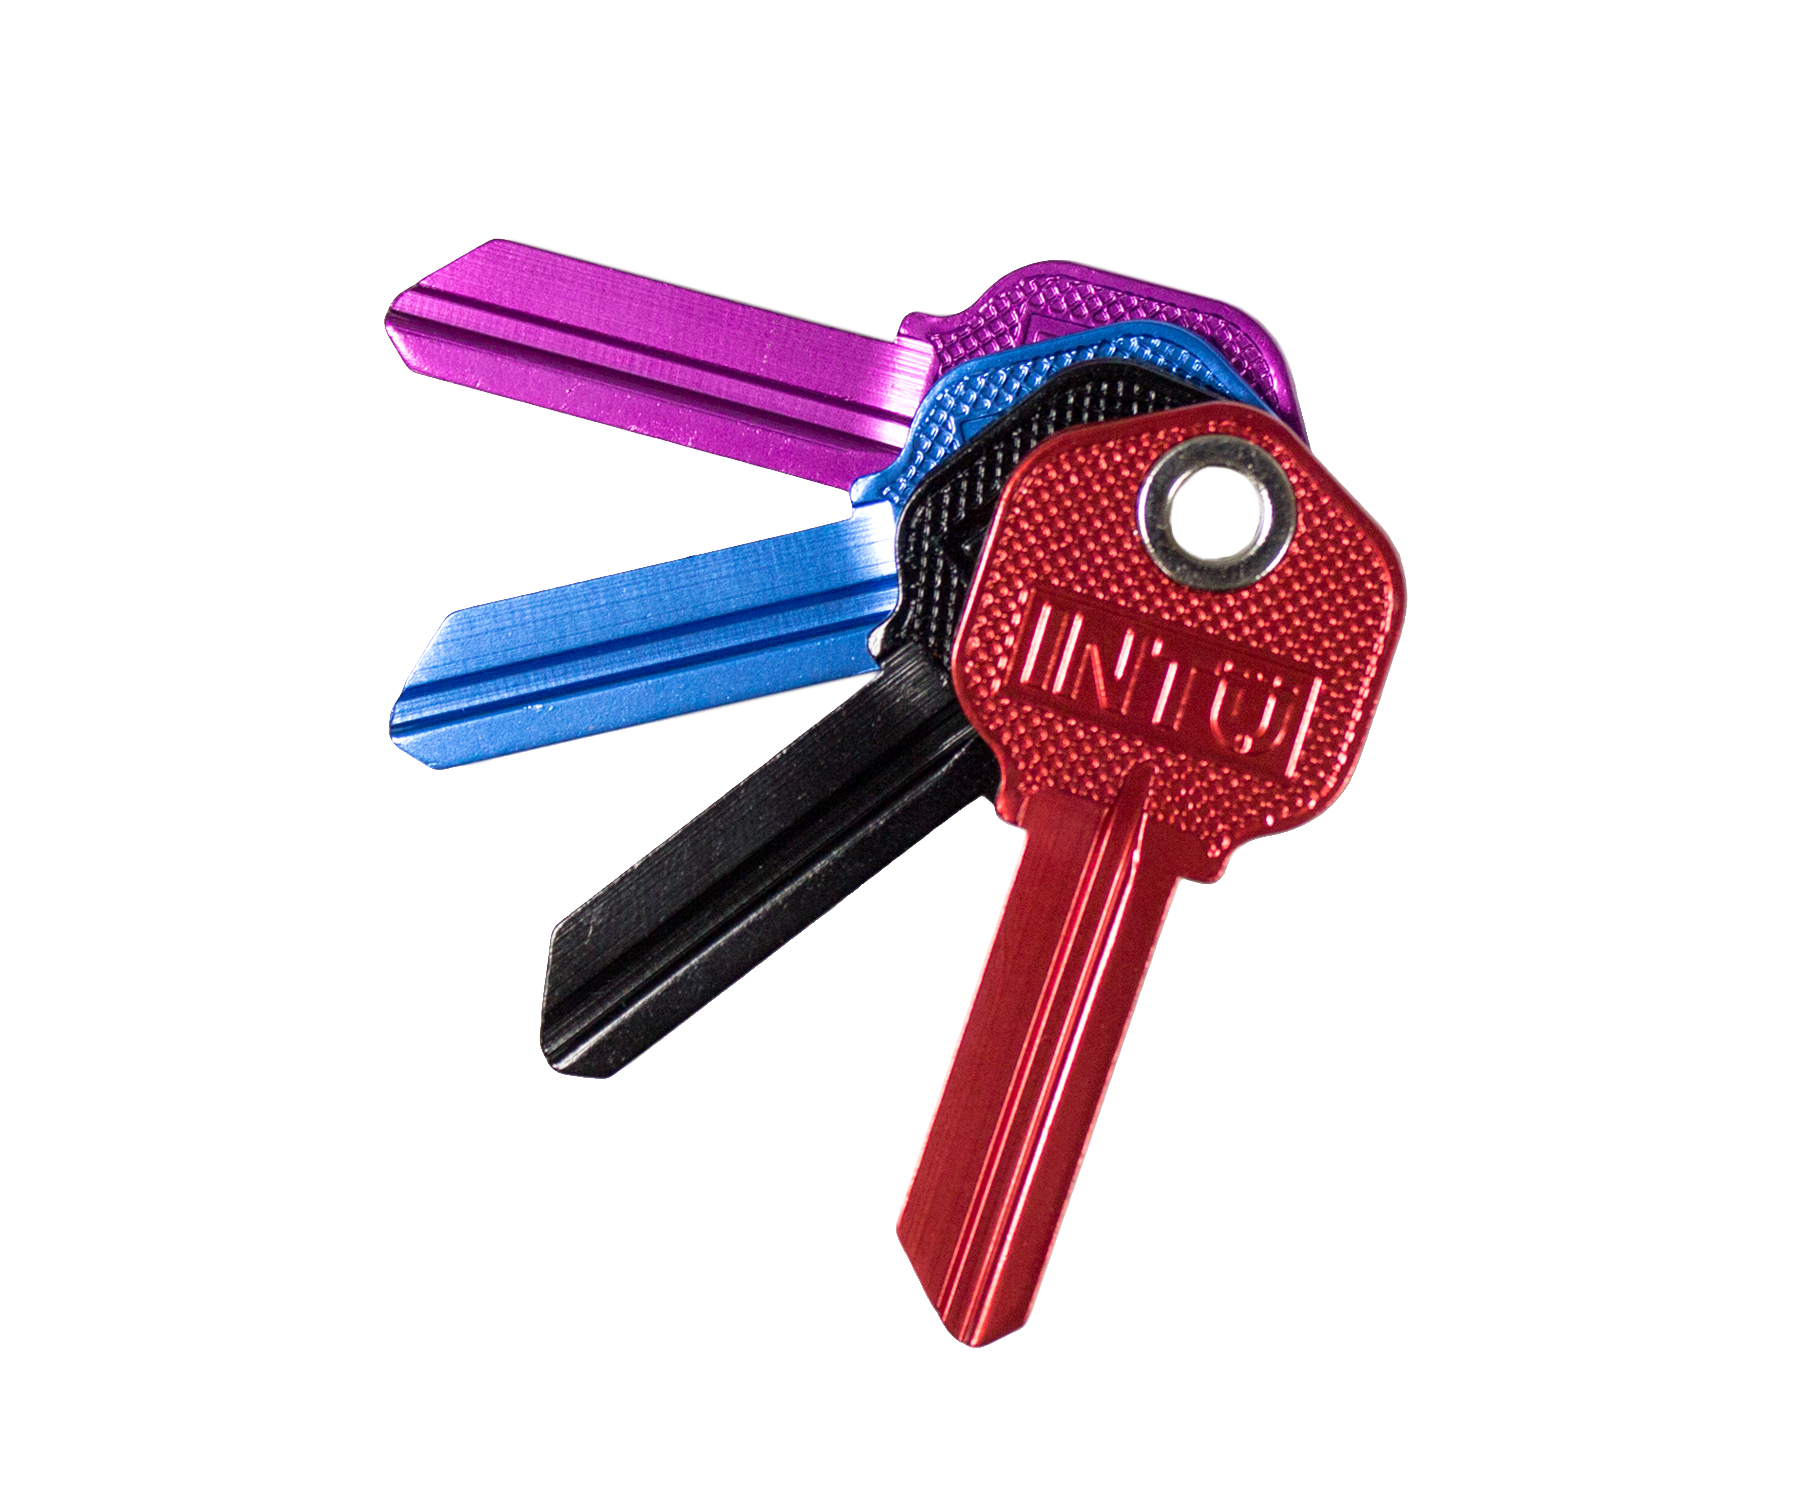 MAGNETIC RED SCHLAGE SC1 HOUSE KEY LUCKY LINE 15670 